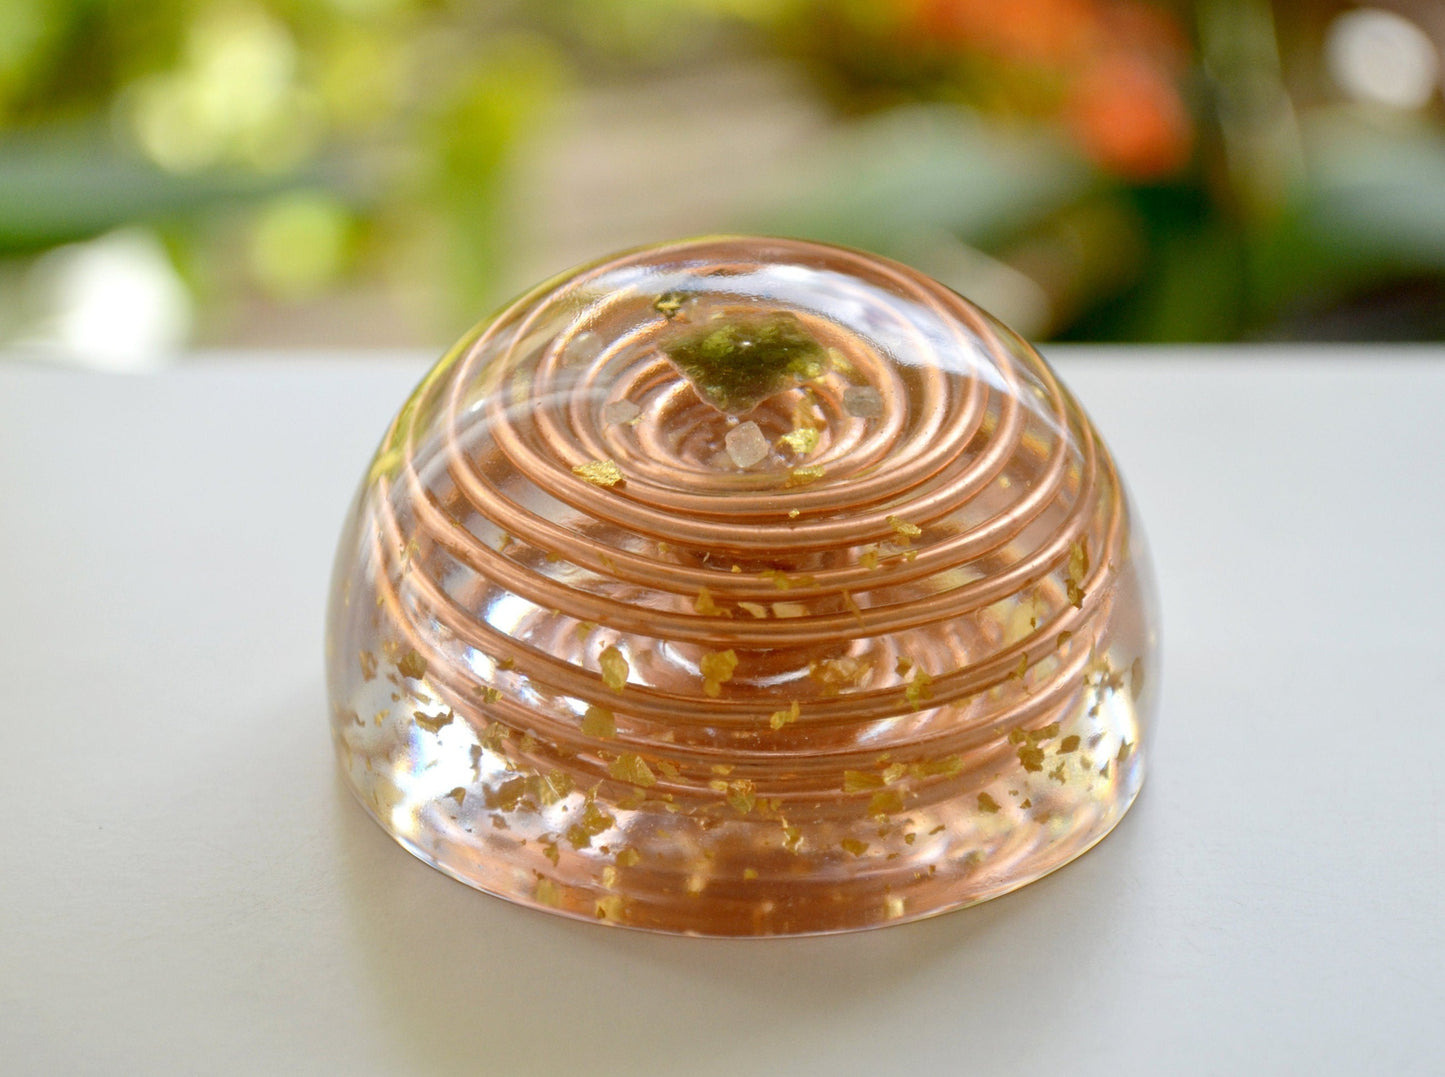 Powerful Orgonite, orgone dome, Most powerful crystals combination with vortex coil, Moldavite Herkimer